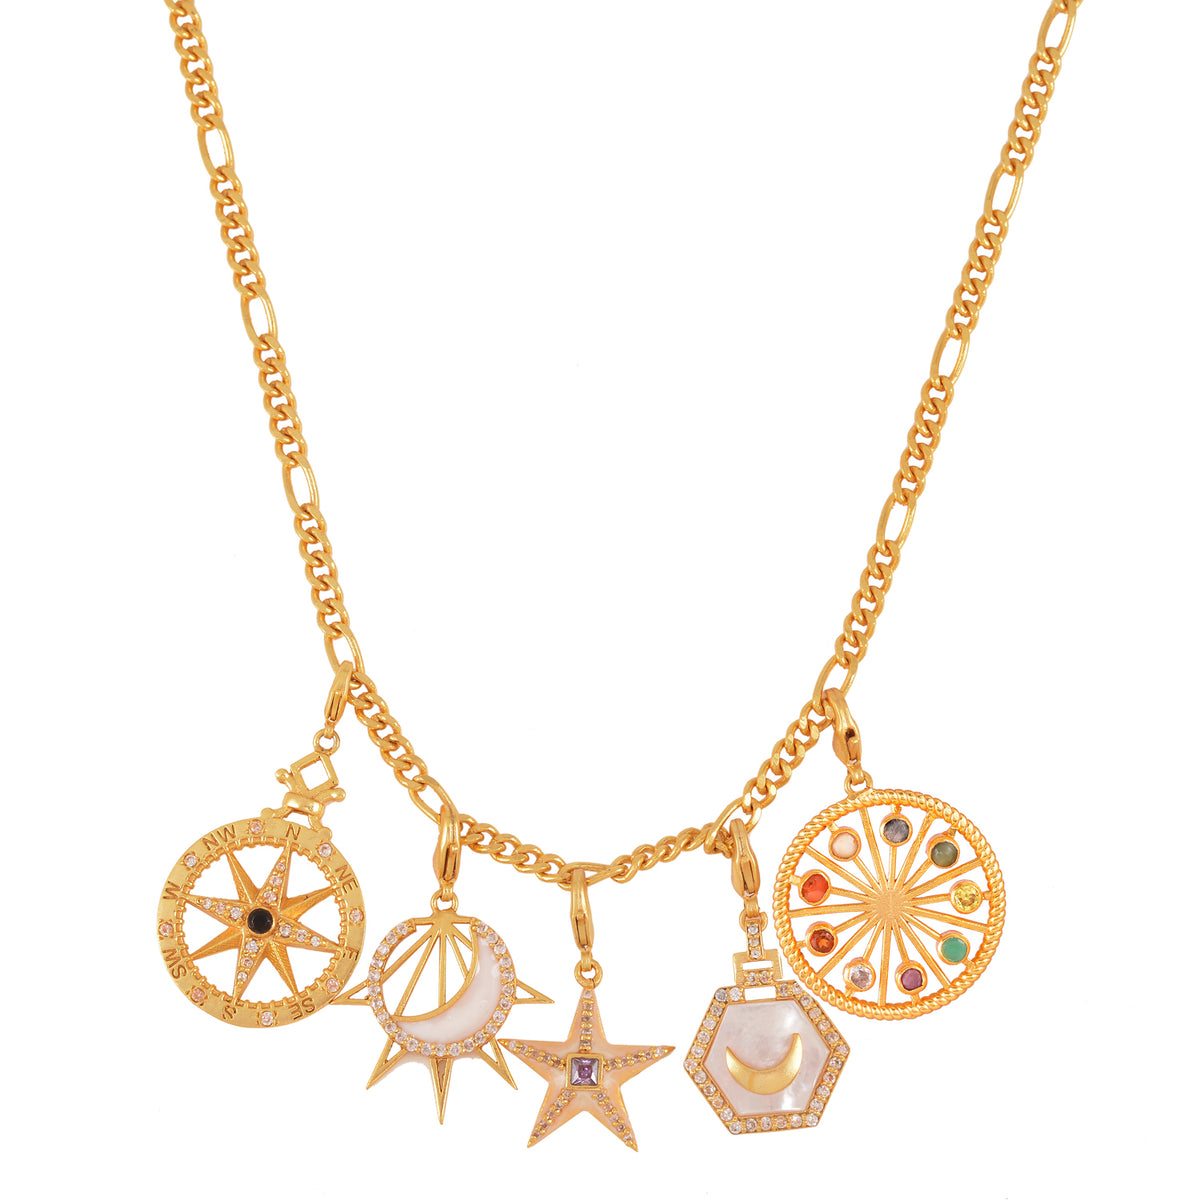 Max Celestial Charm Necklace